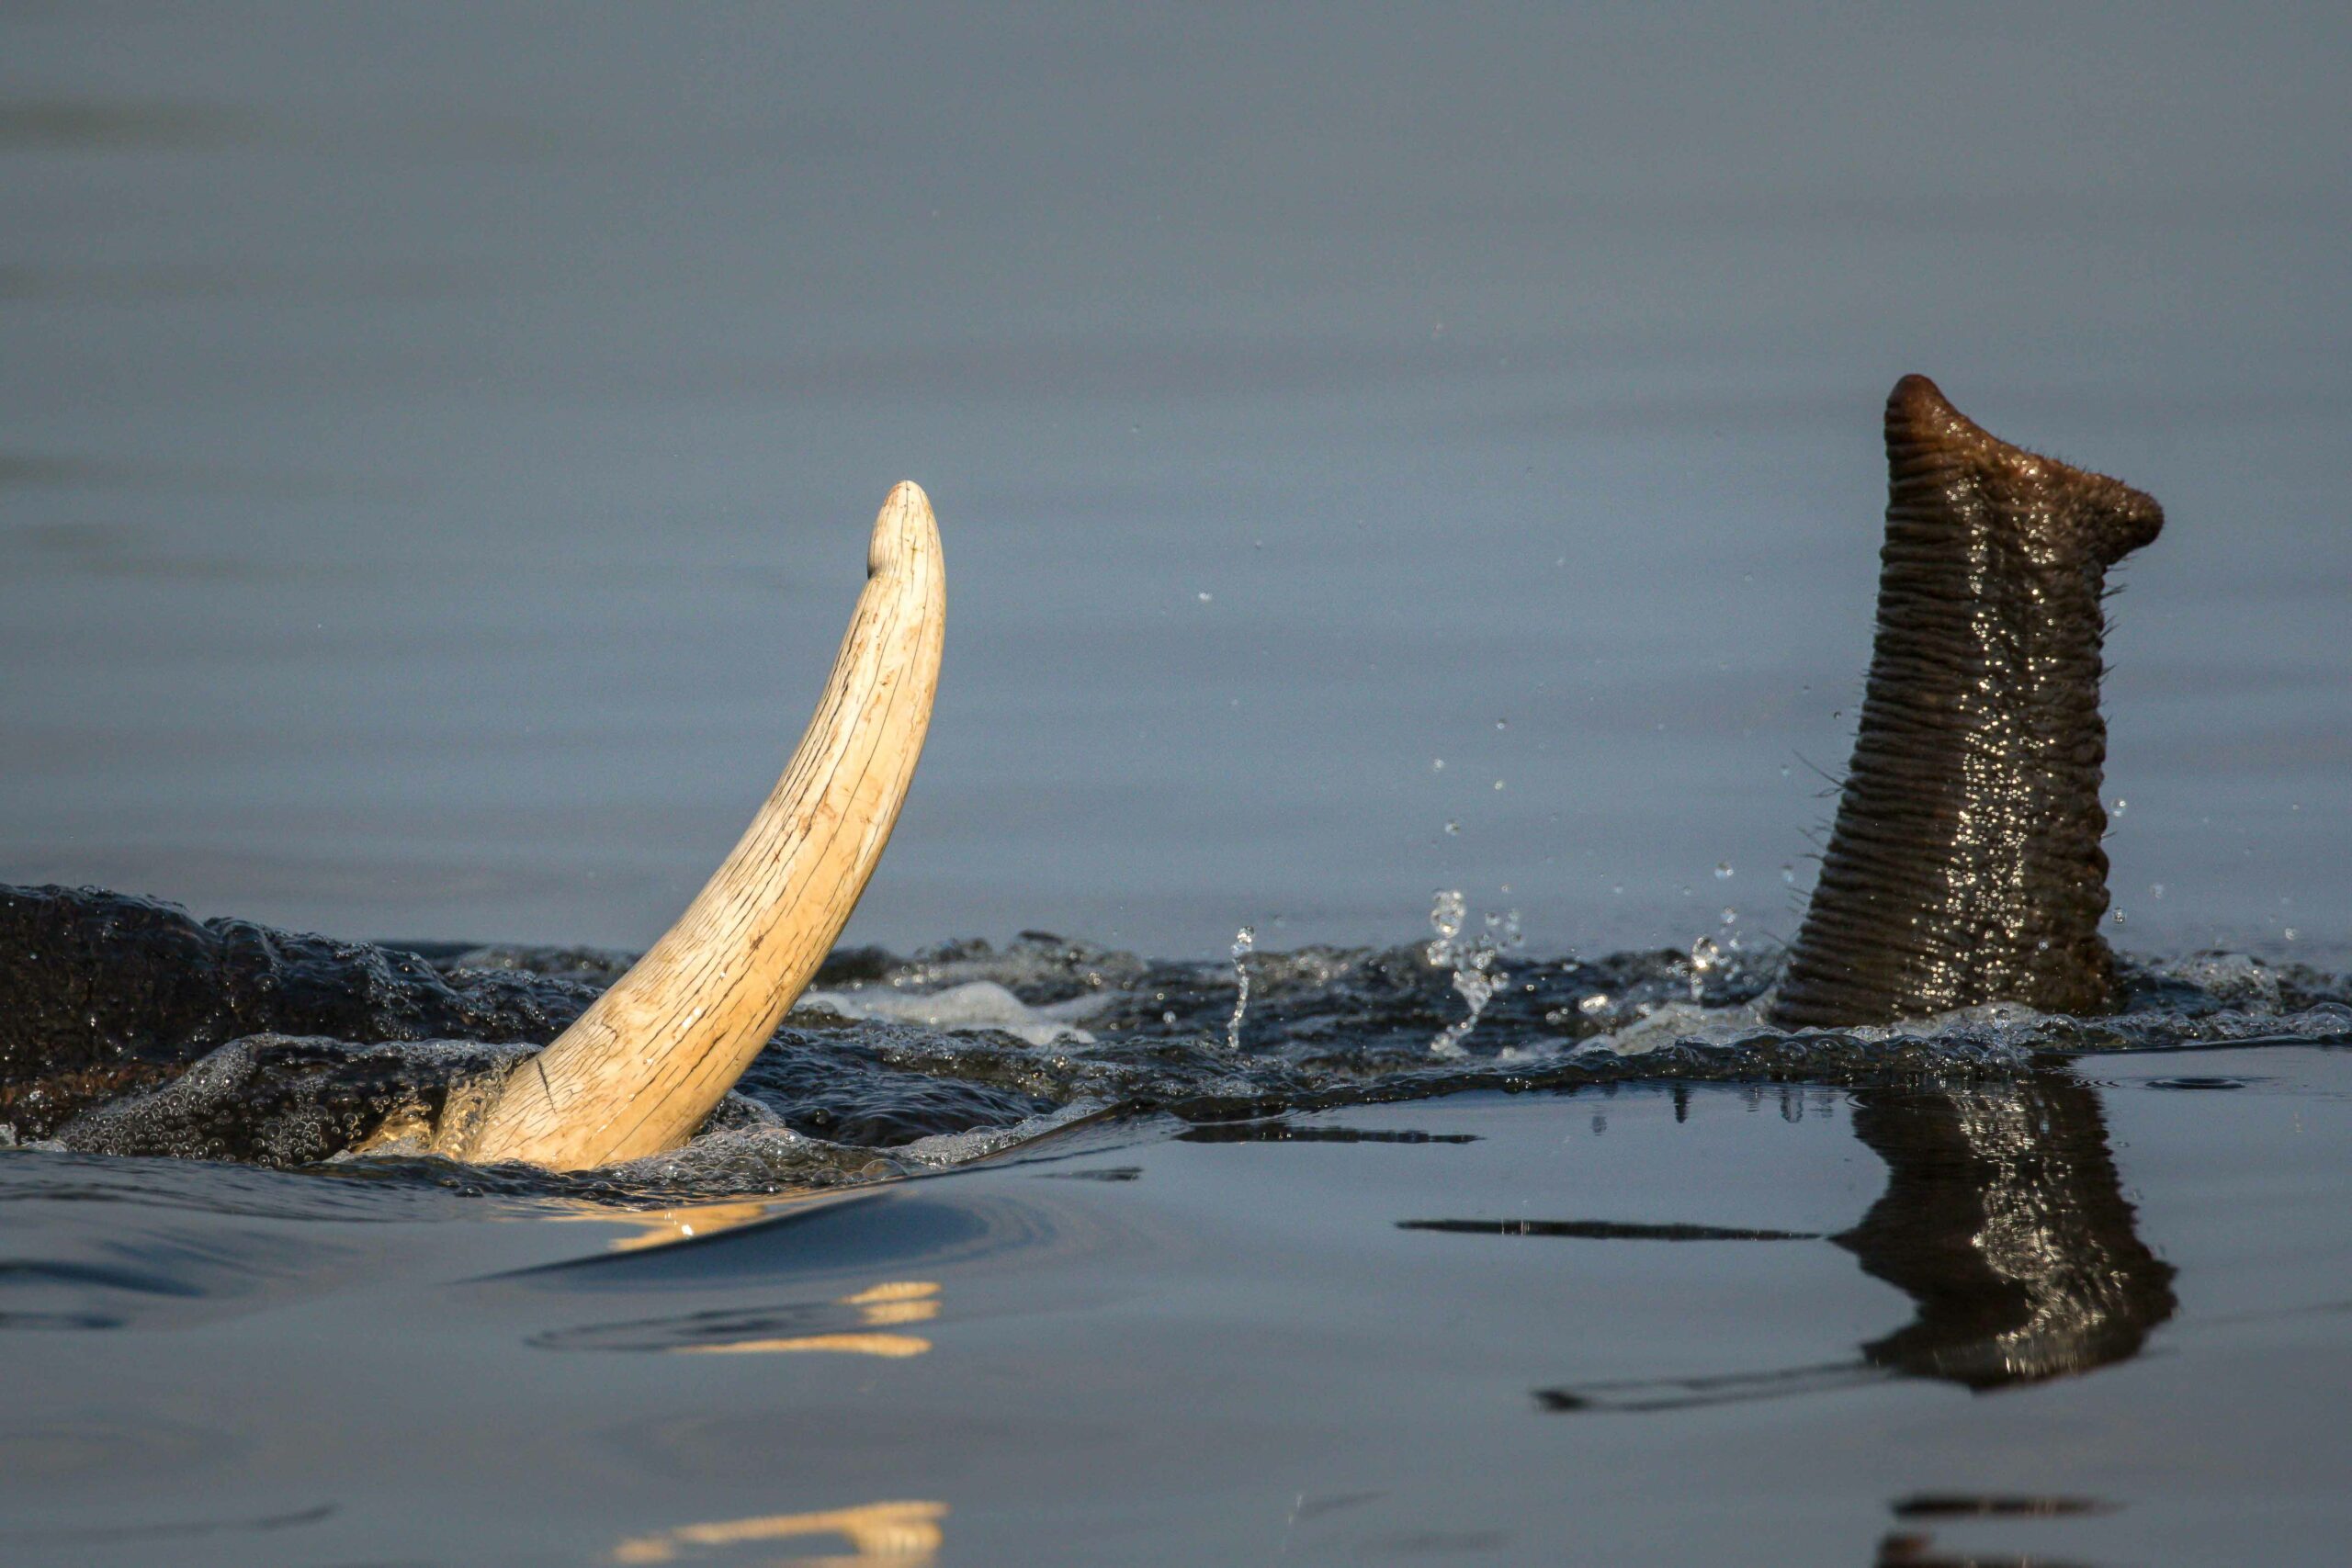 charl's tusk and trunk in the chobe river